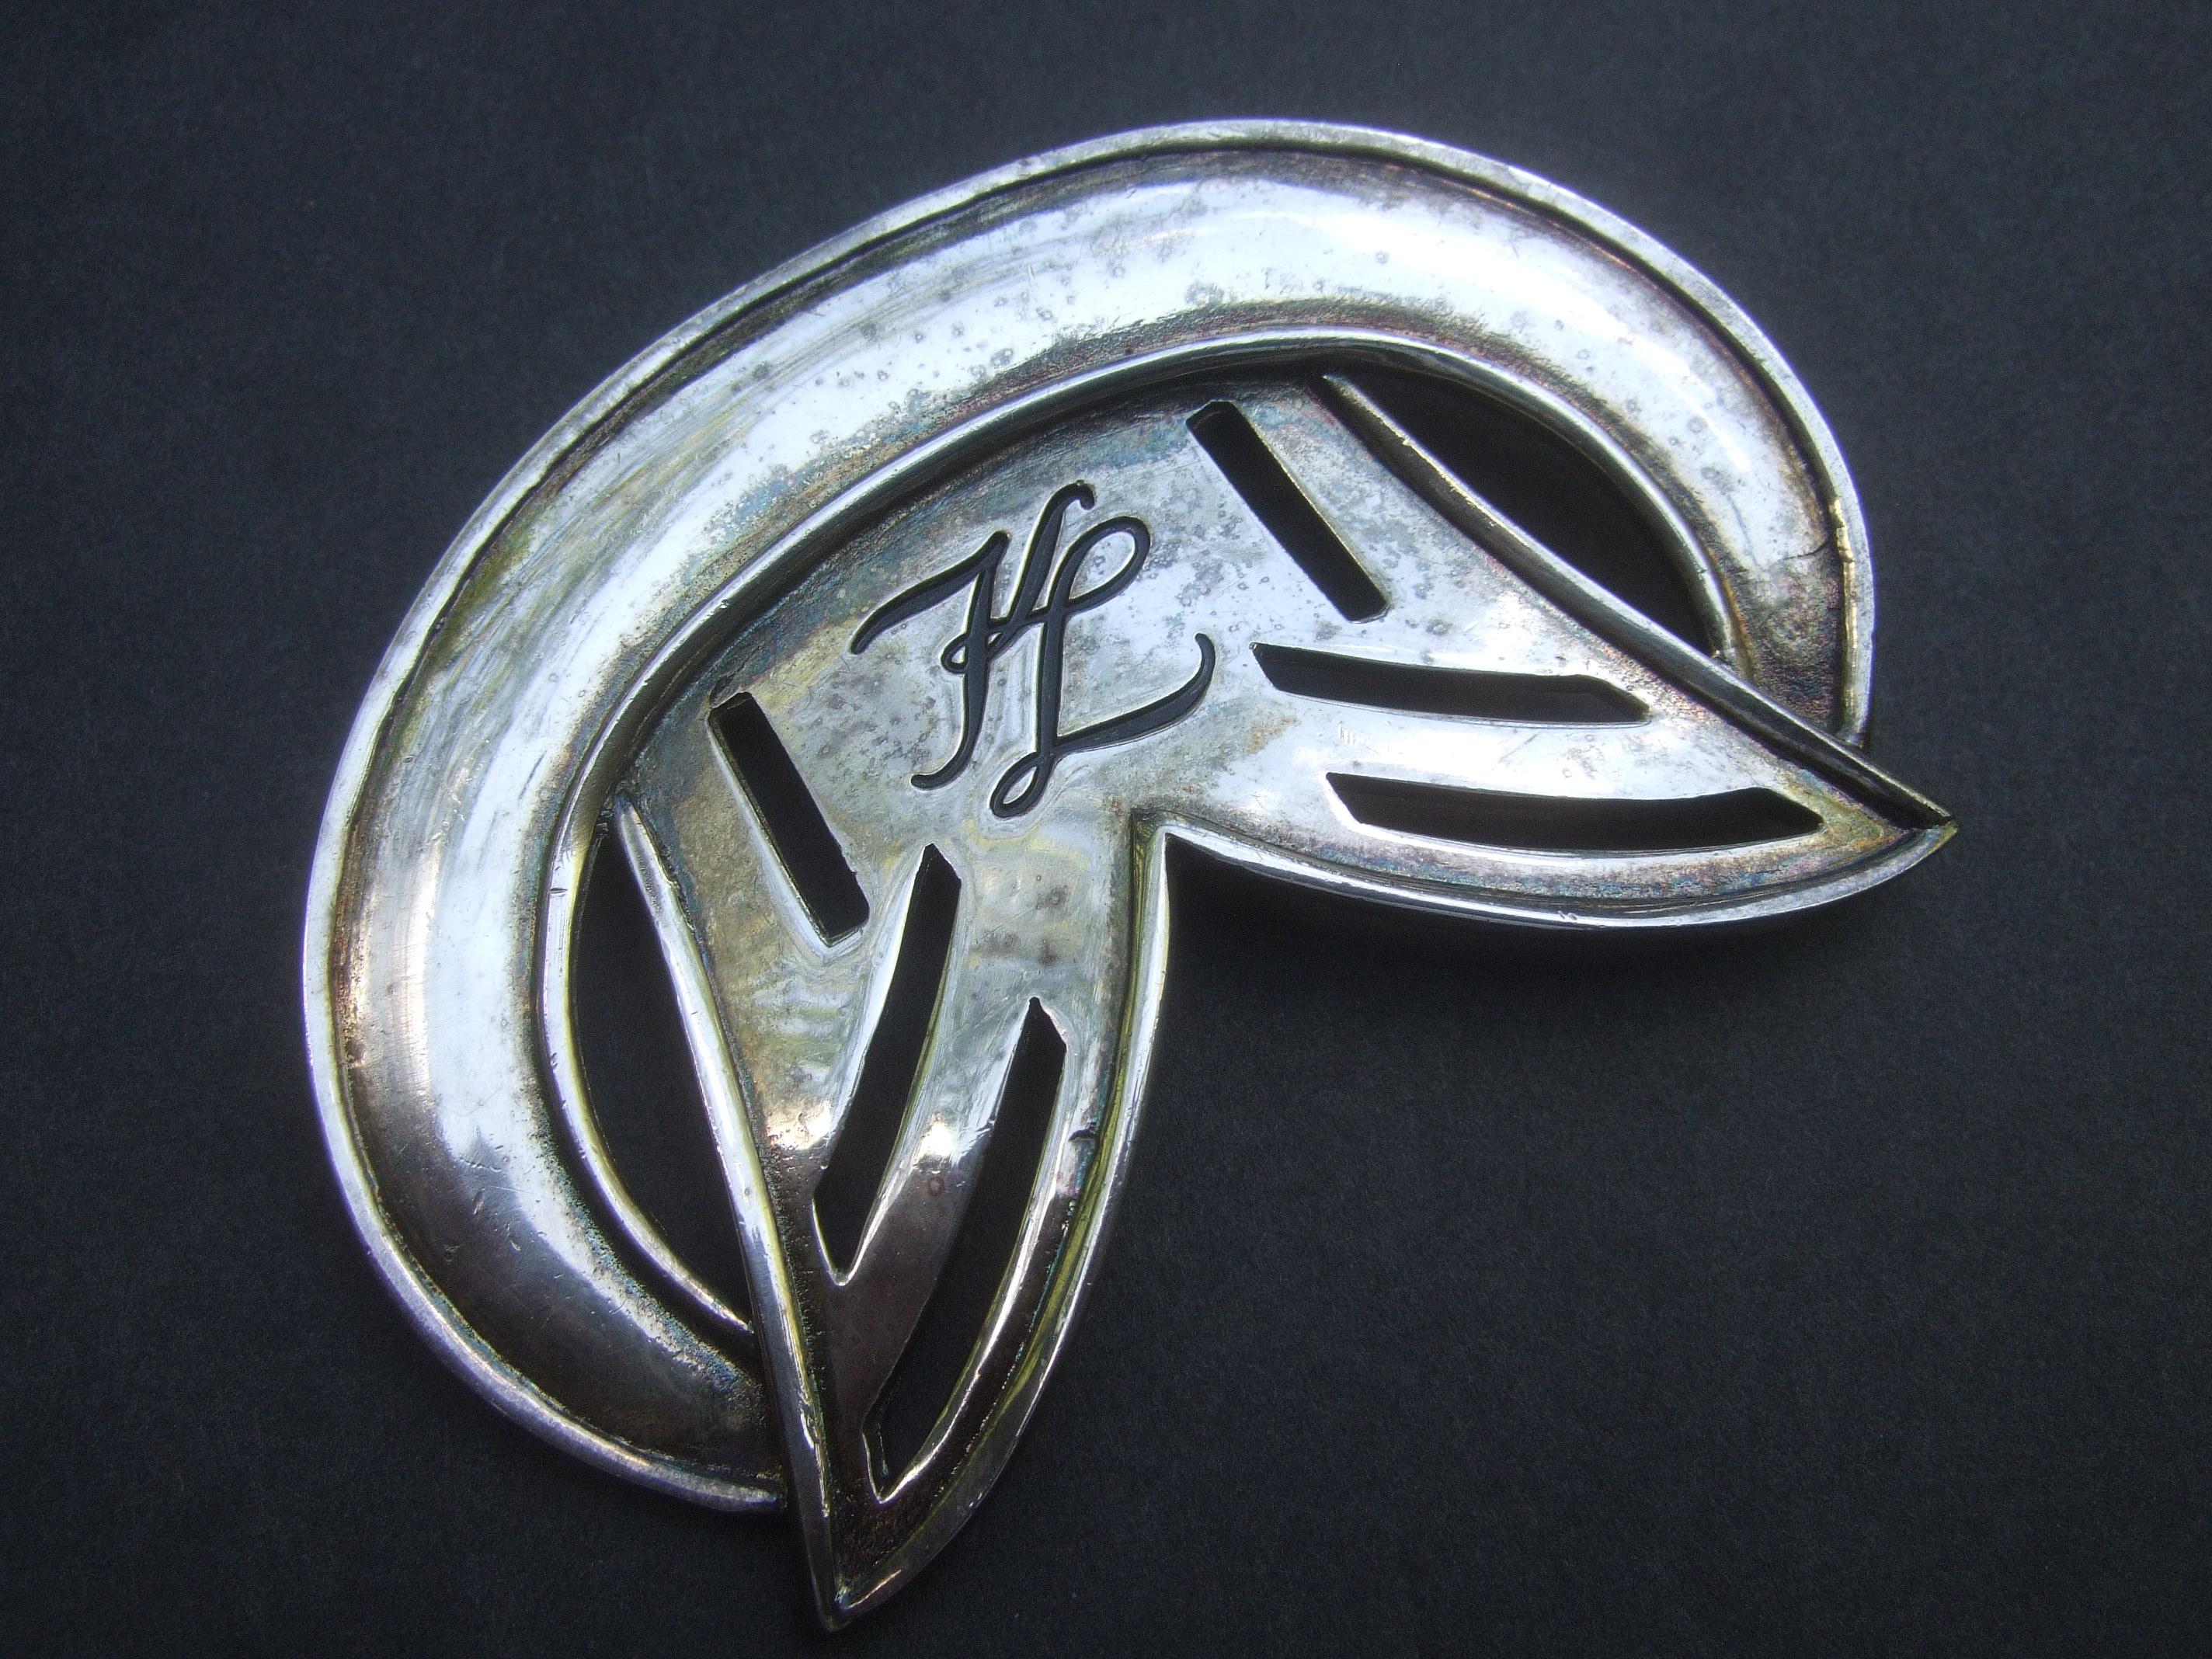 Karl Lagerfeld Sleek Large Silver Metal Brooch in Lagerfeld Box c 1980s In Good Condition For Sale In University City, MO